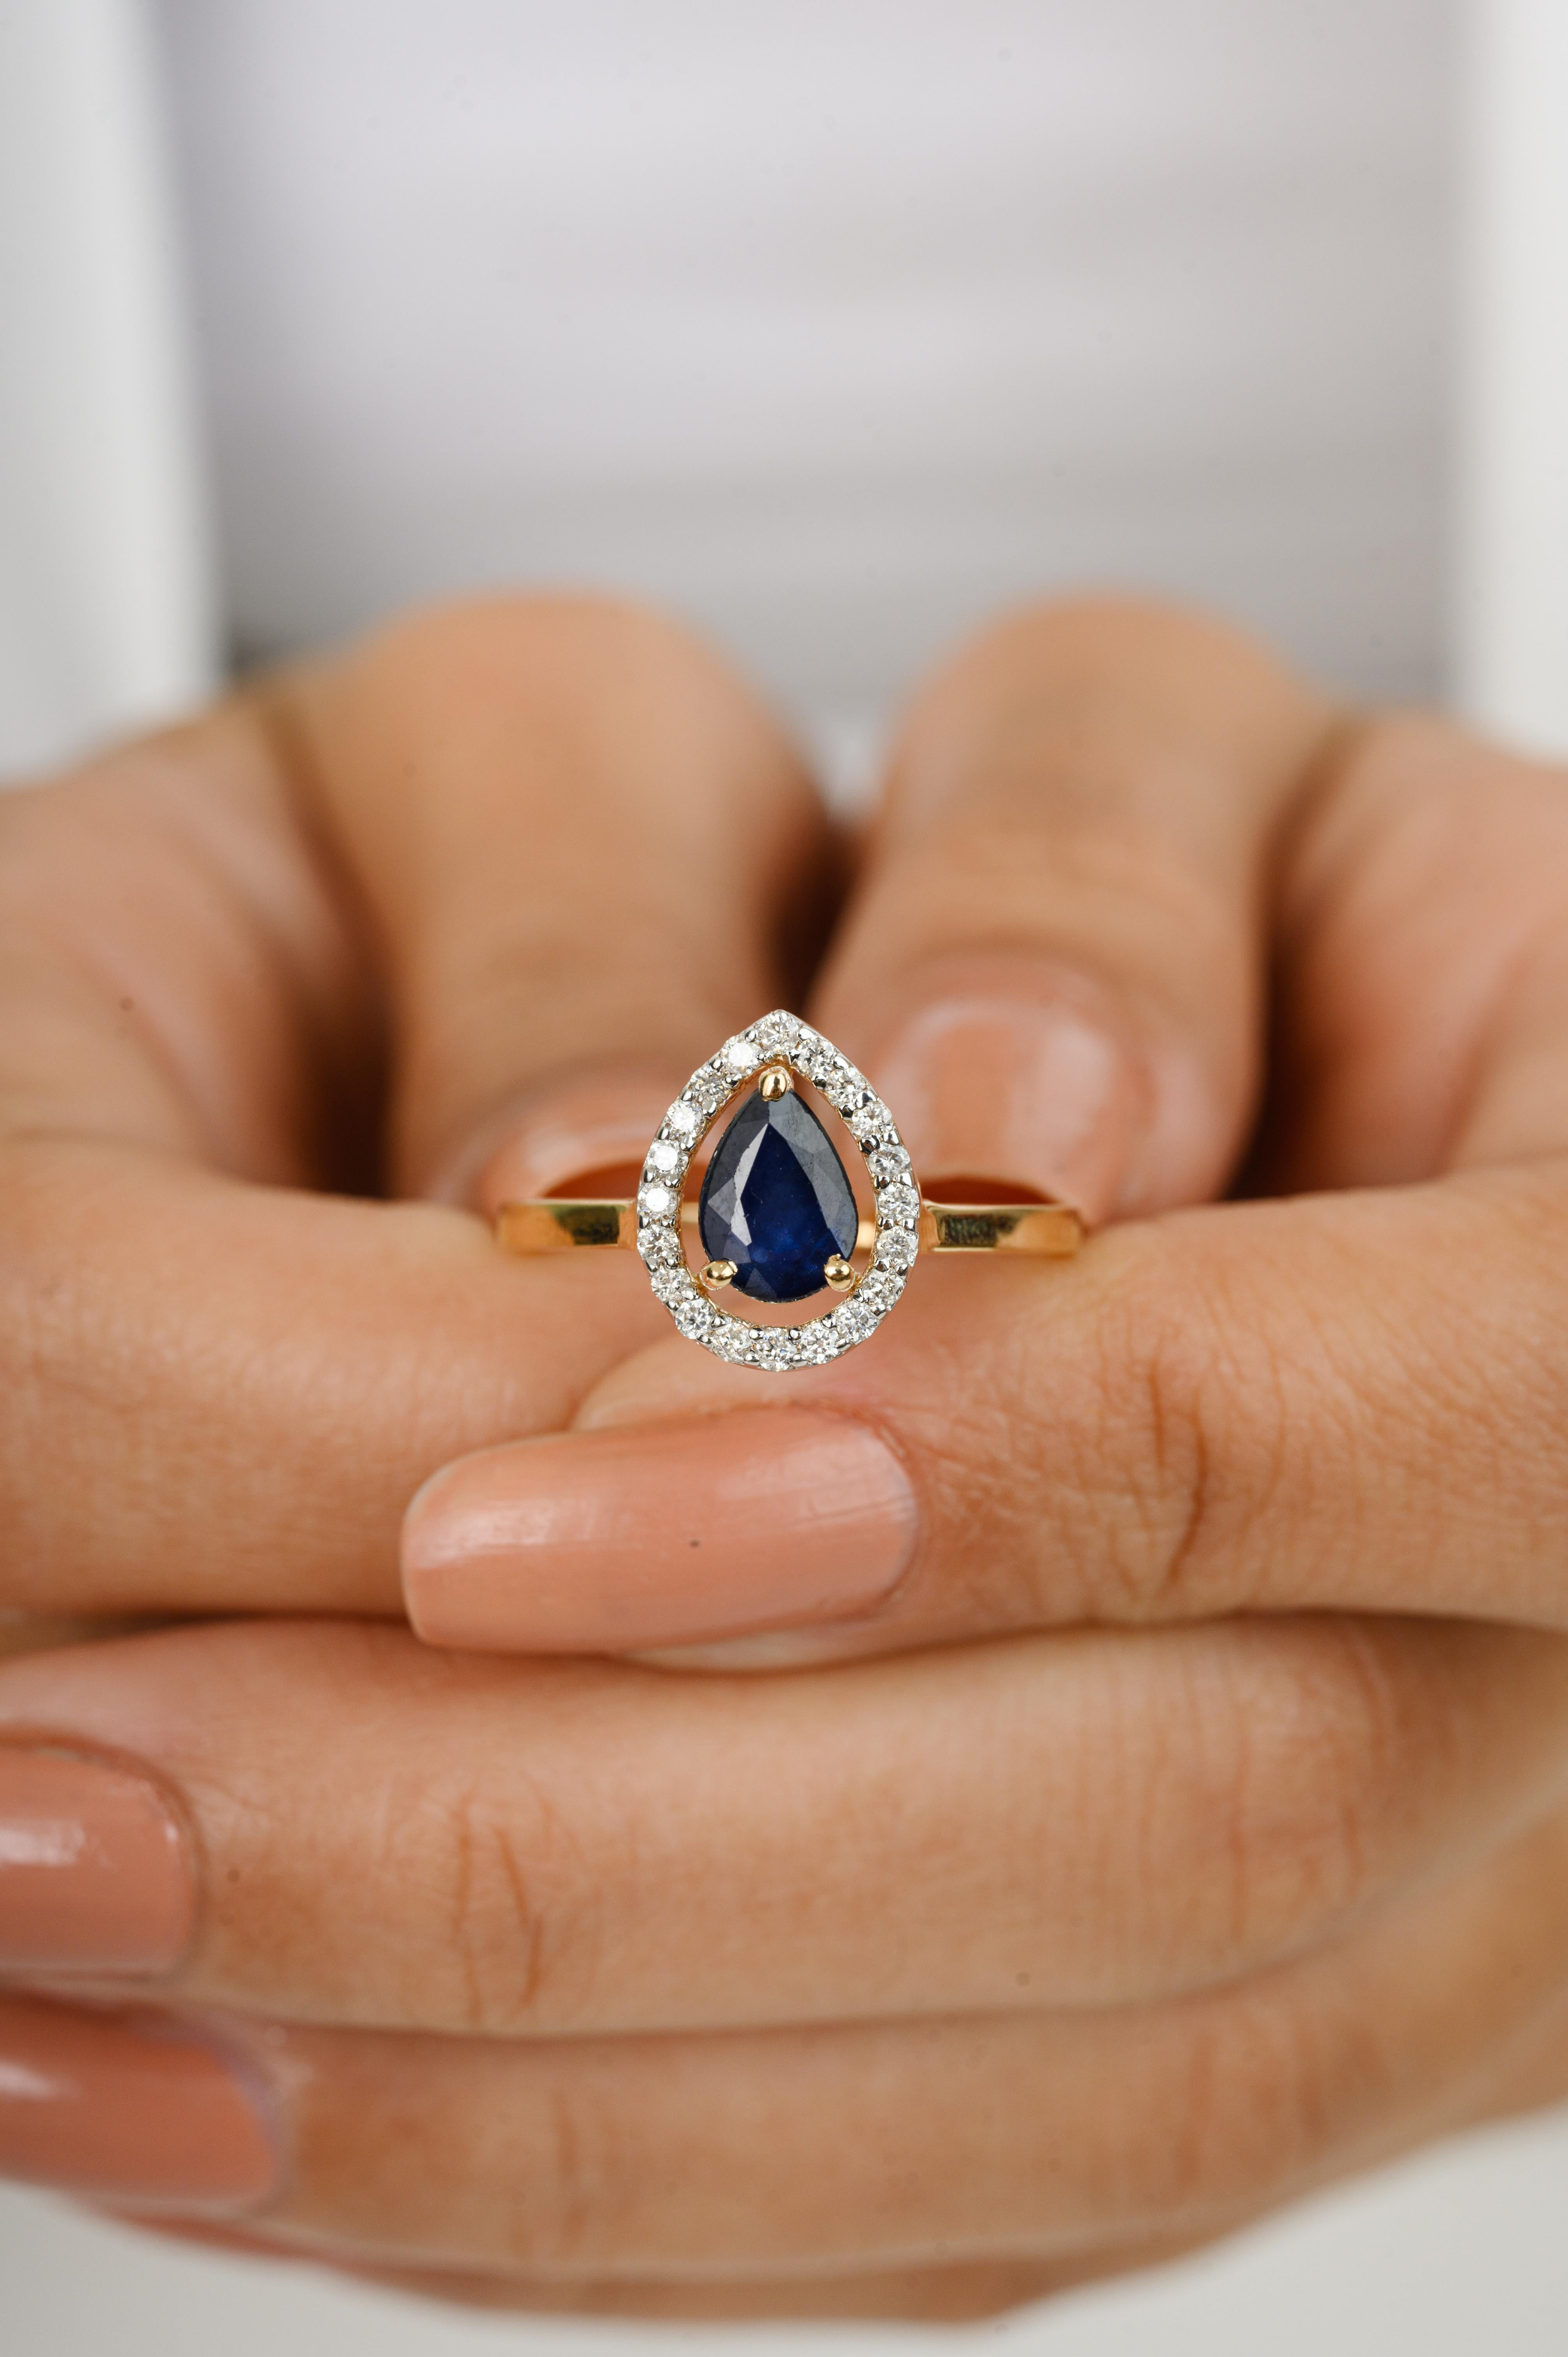 For Sale:  Pear Blue Sapphire Round Diamond Halo Engagement Ring Gift in 18k Yellow Gold 5